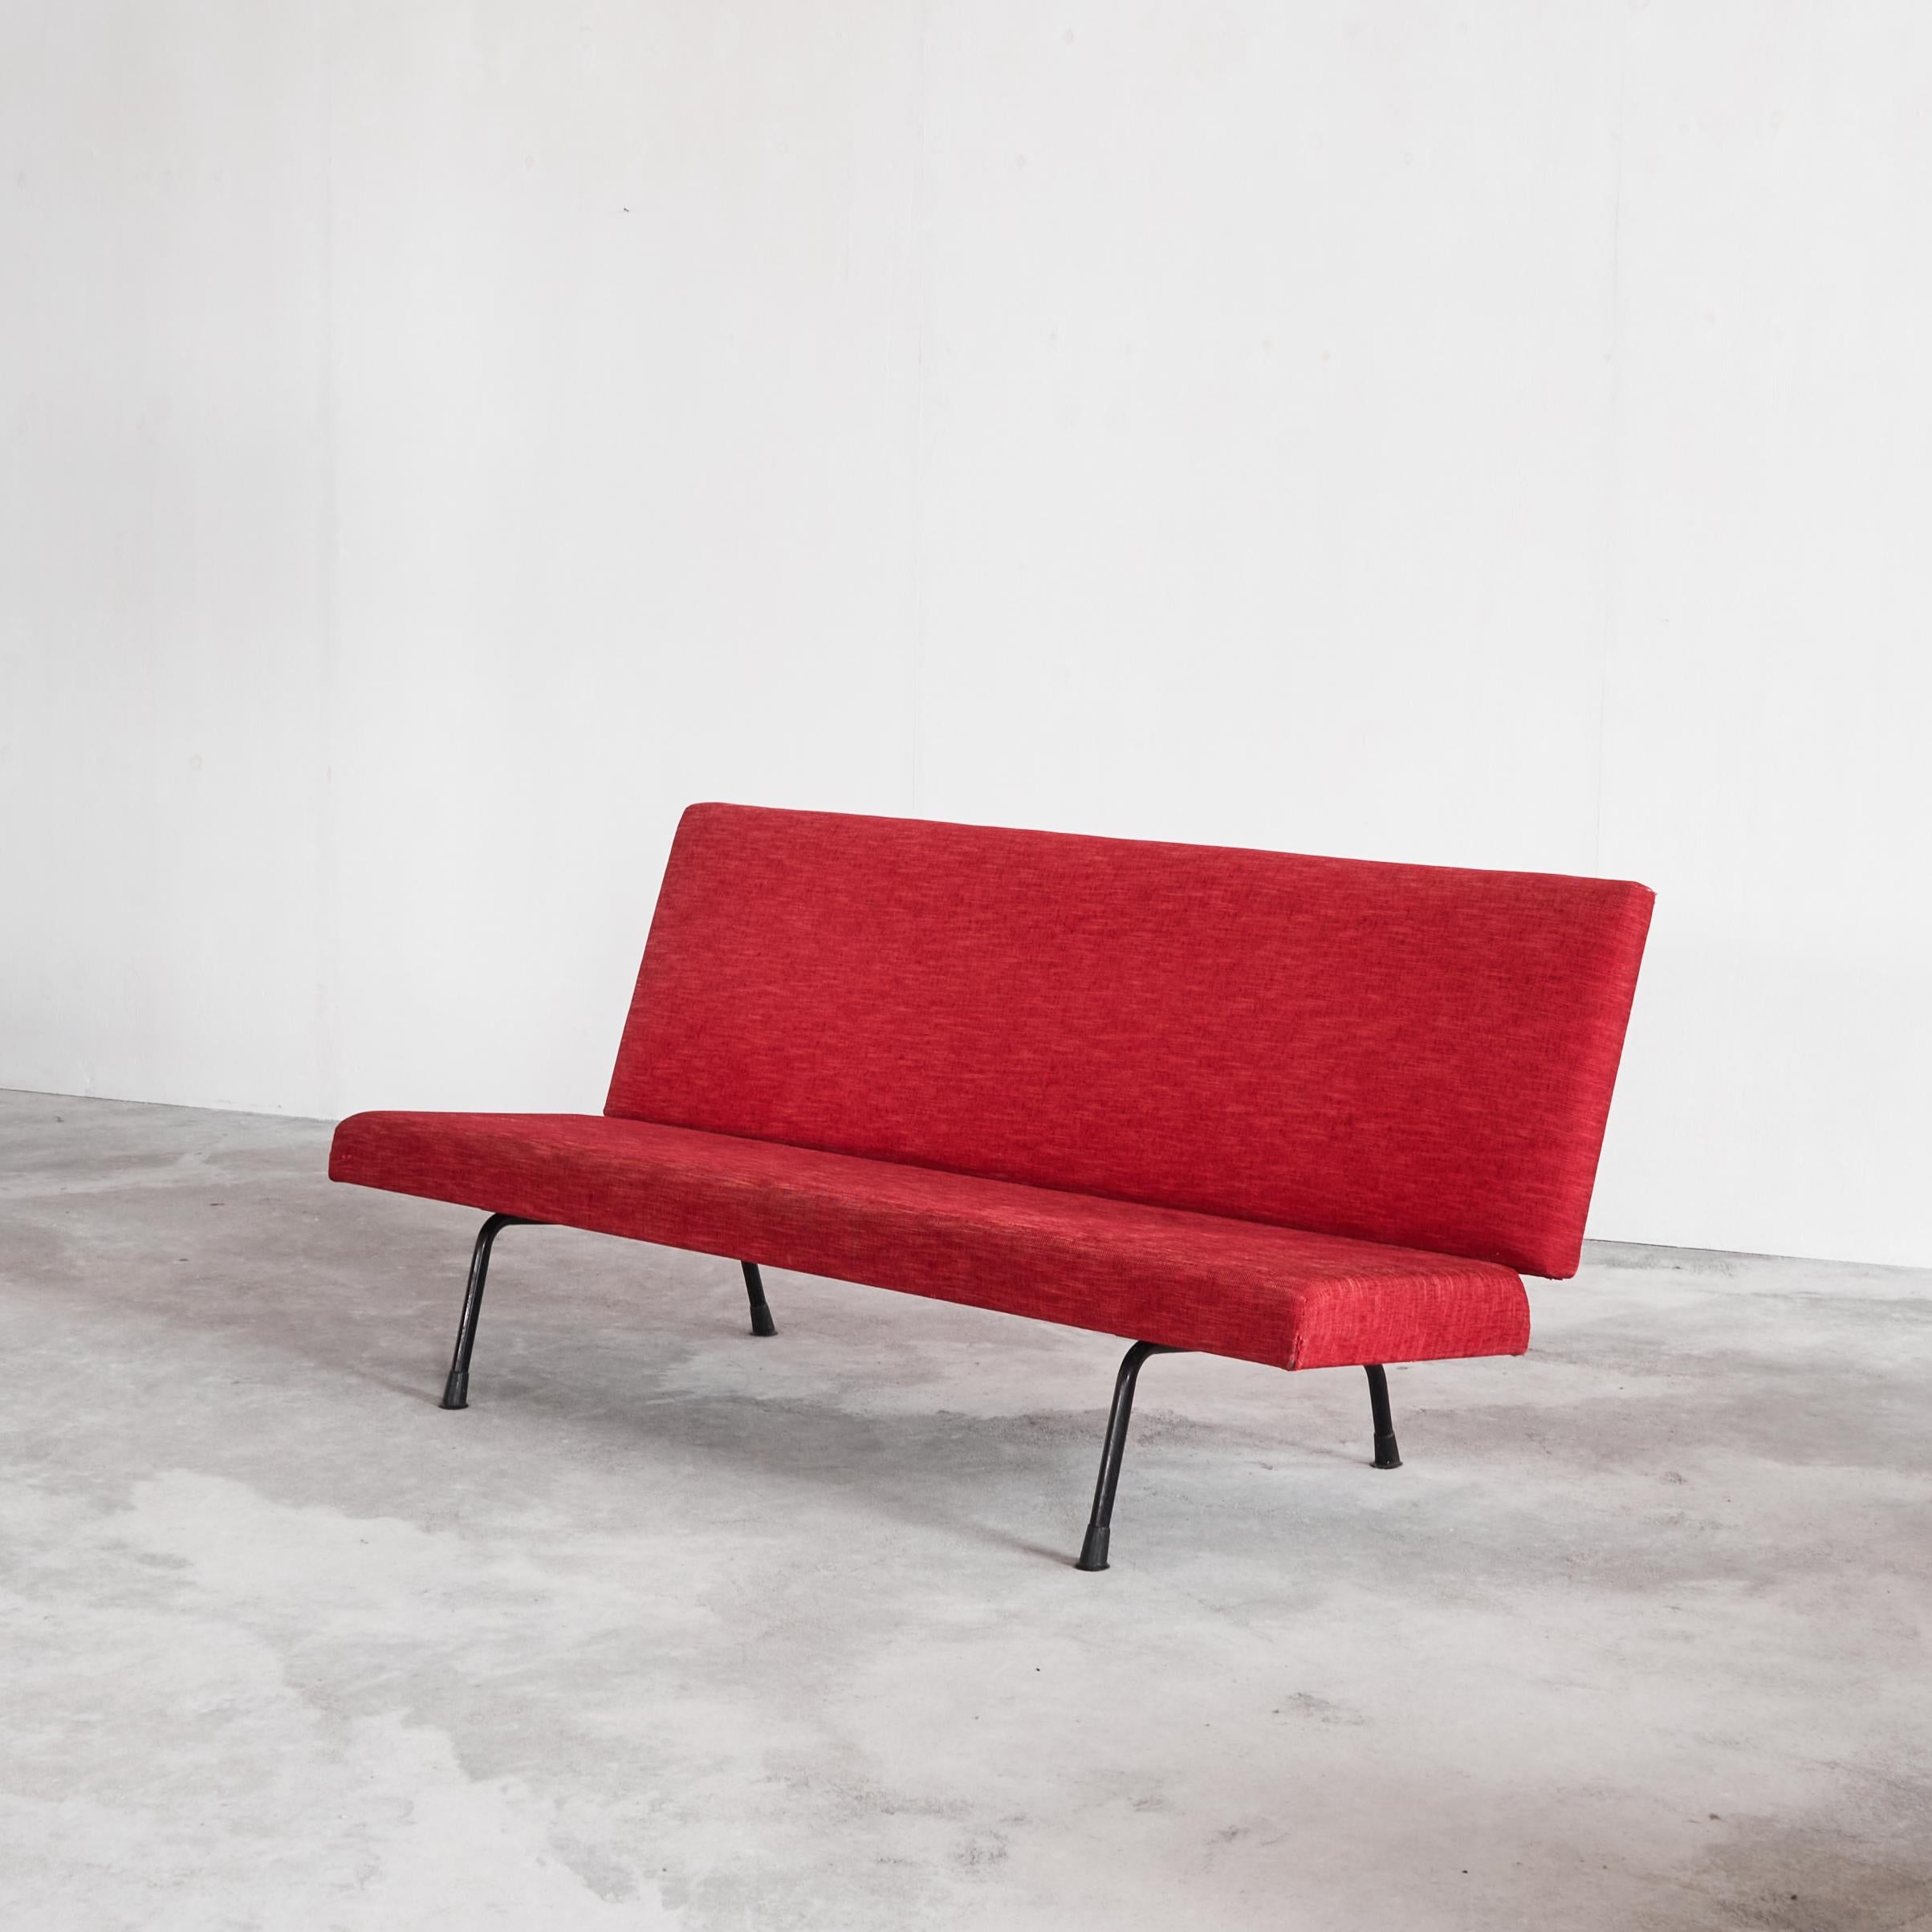 Mid-Century Modern Wim Rietveld '447' Sofa in Red Fabric 1950s For Sale